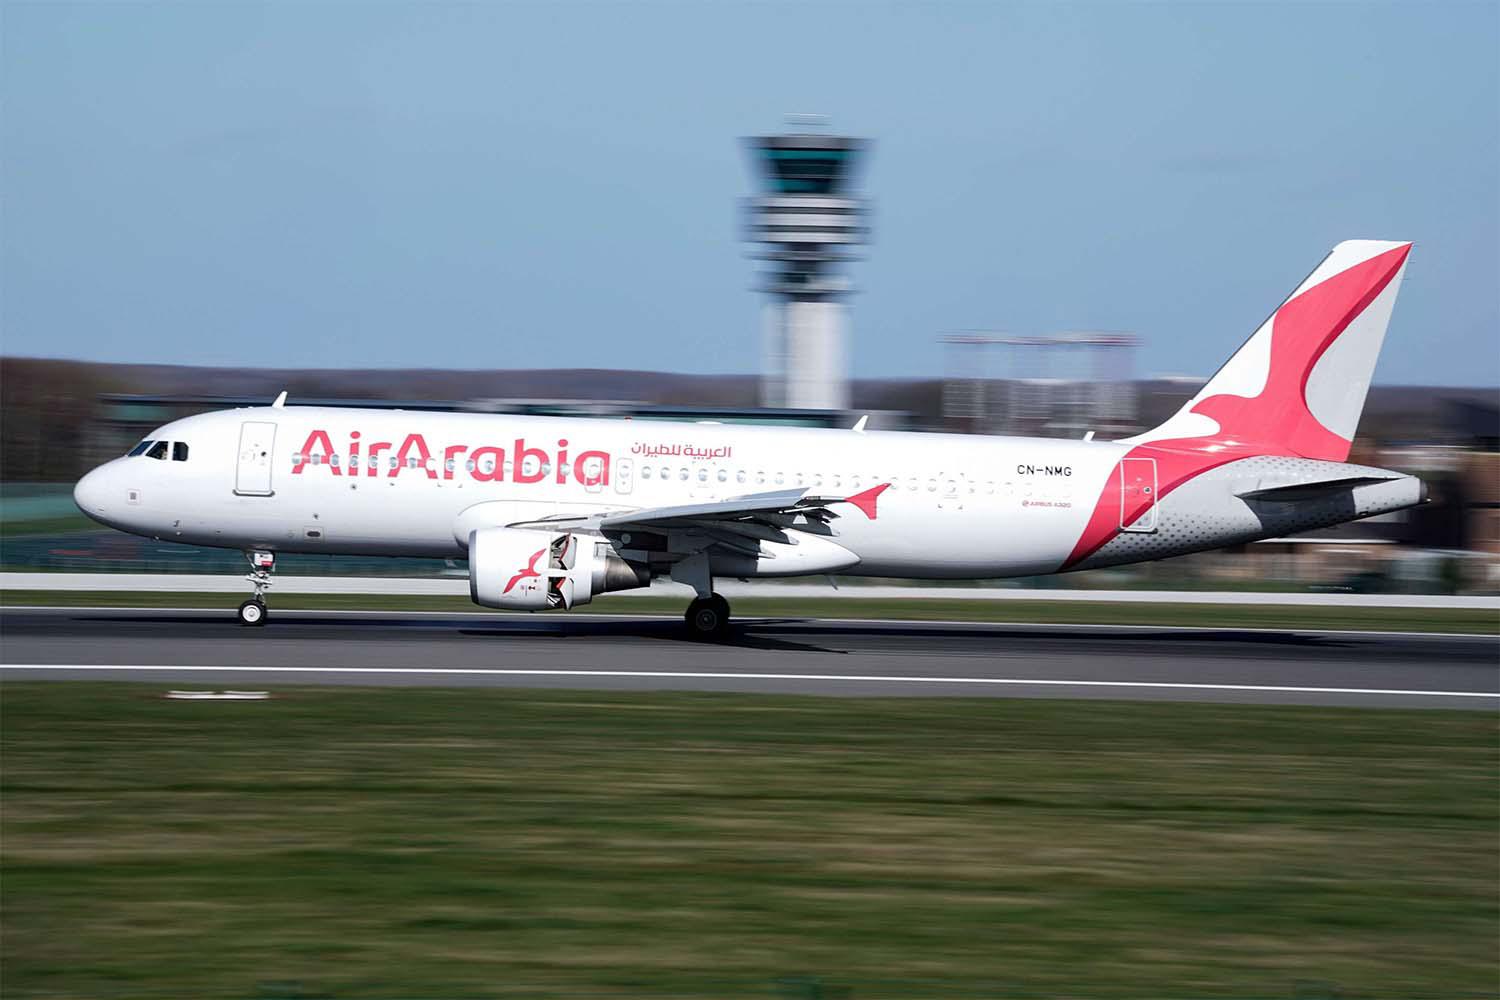 Air Arabia has lost $57.86 million in the first nine months of 2020